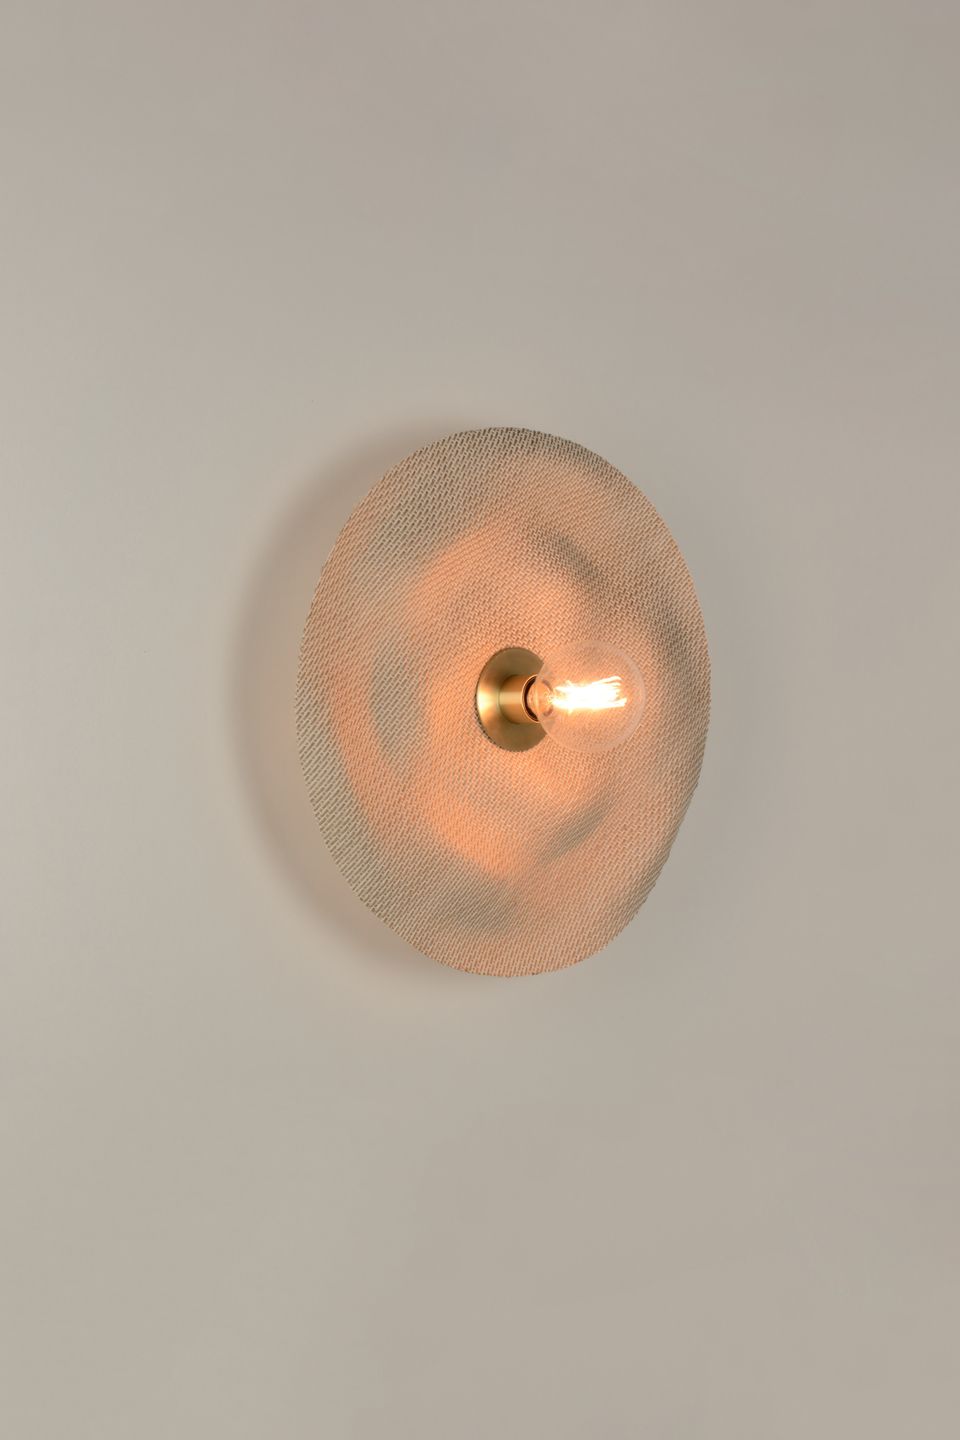 Wall lamp (Sconce) RIVAGE by Market Set